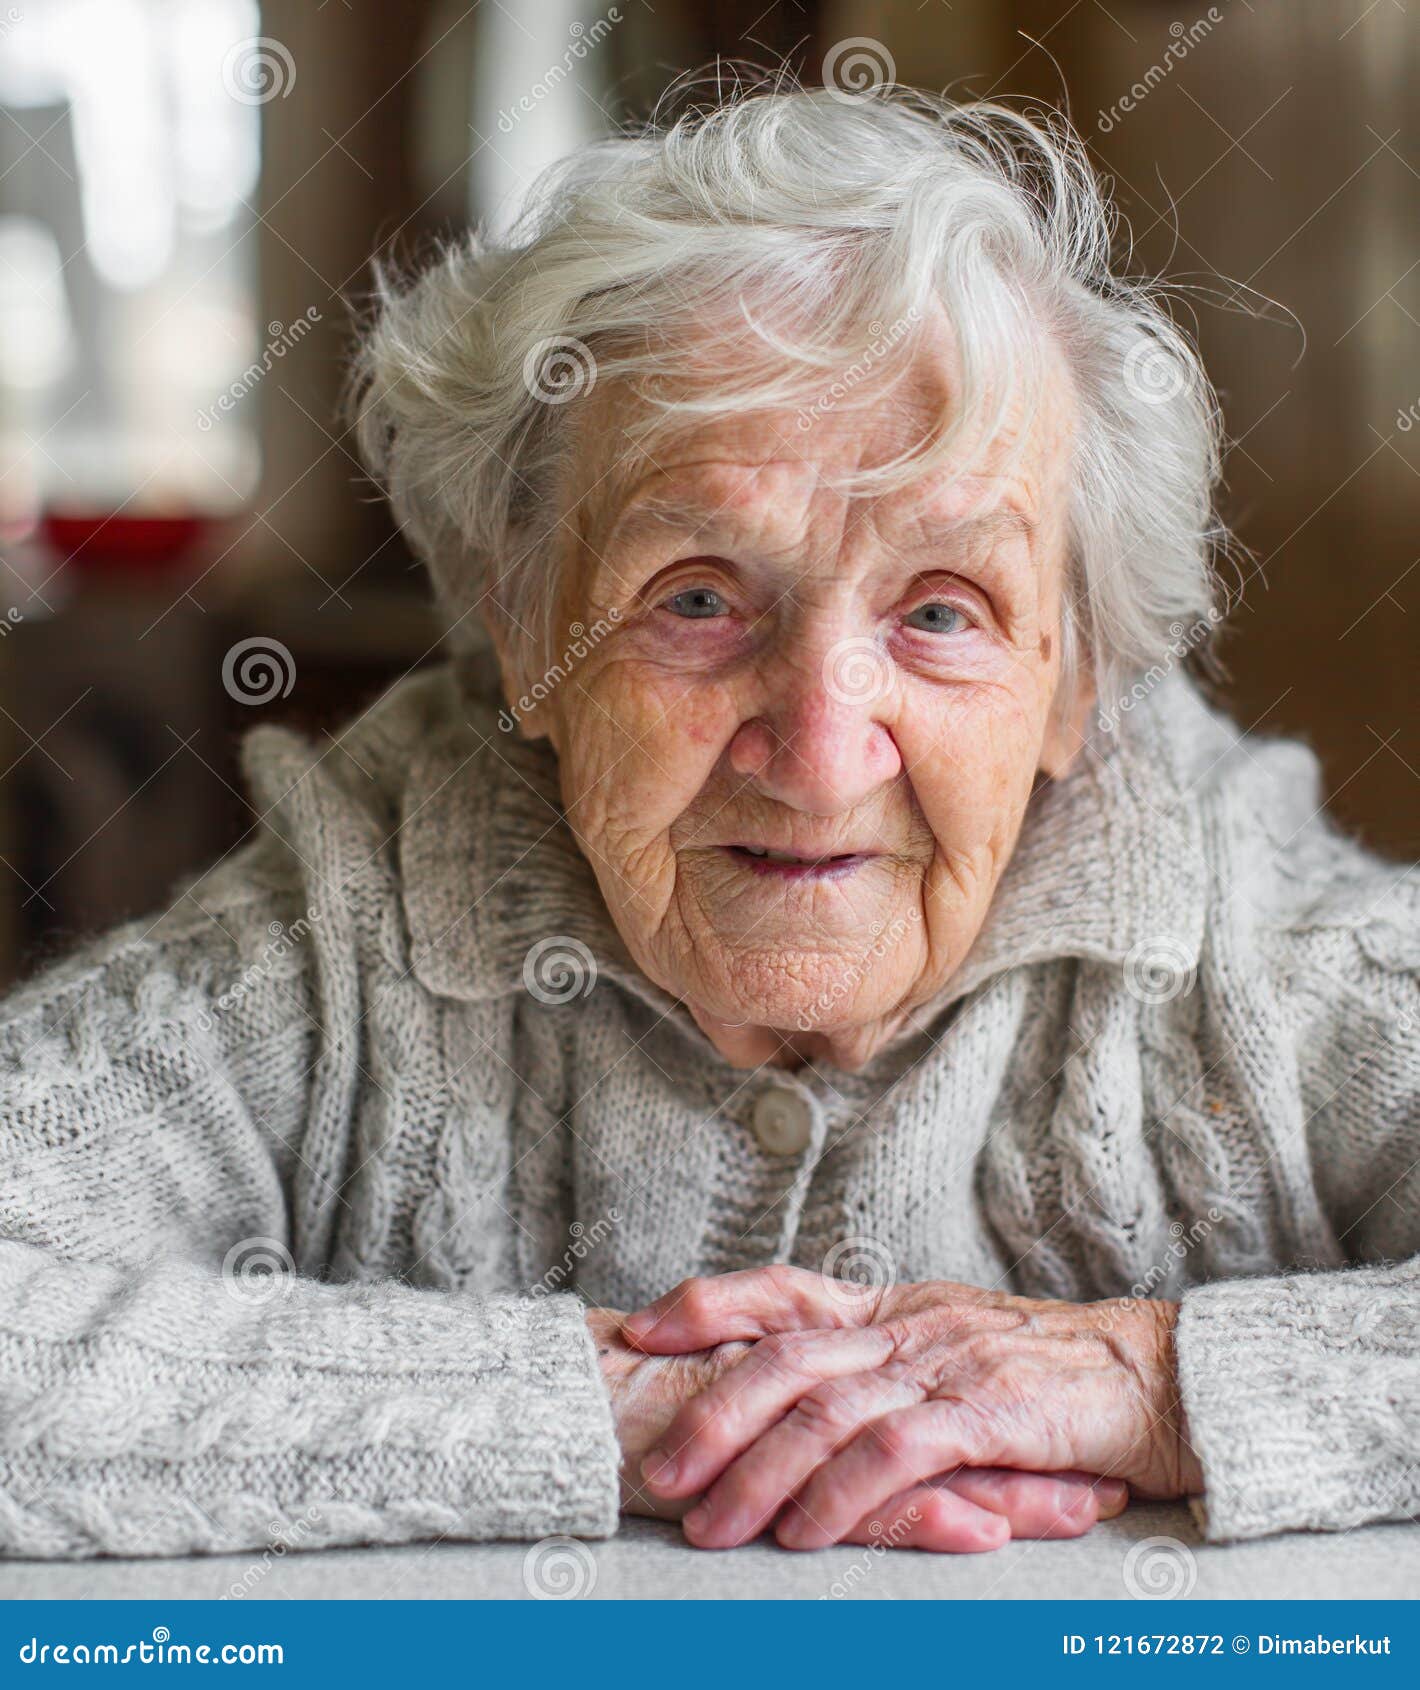 5,897 Very Old Old Woman Stock Photos - Free & Royalty-Free Stock